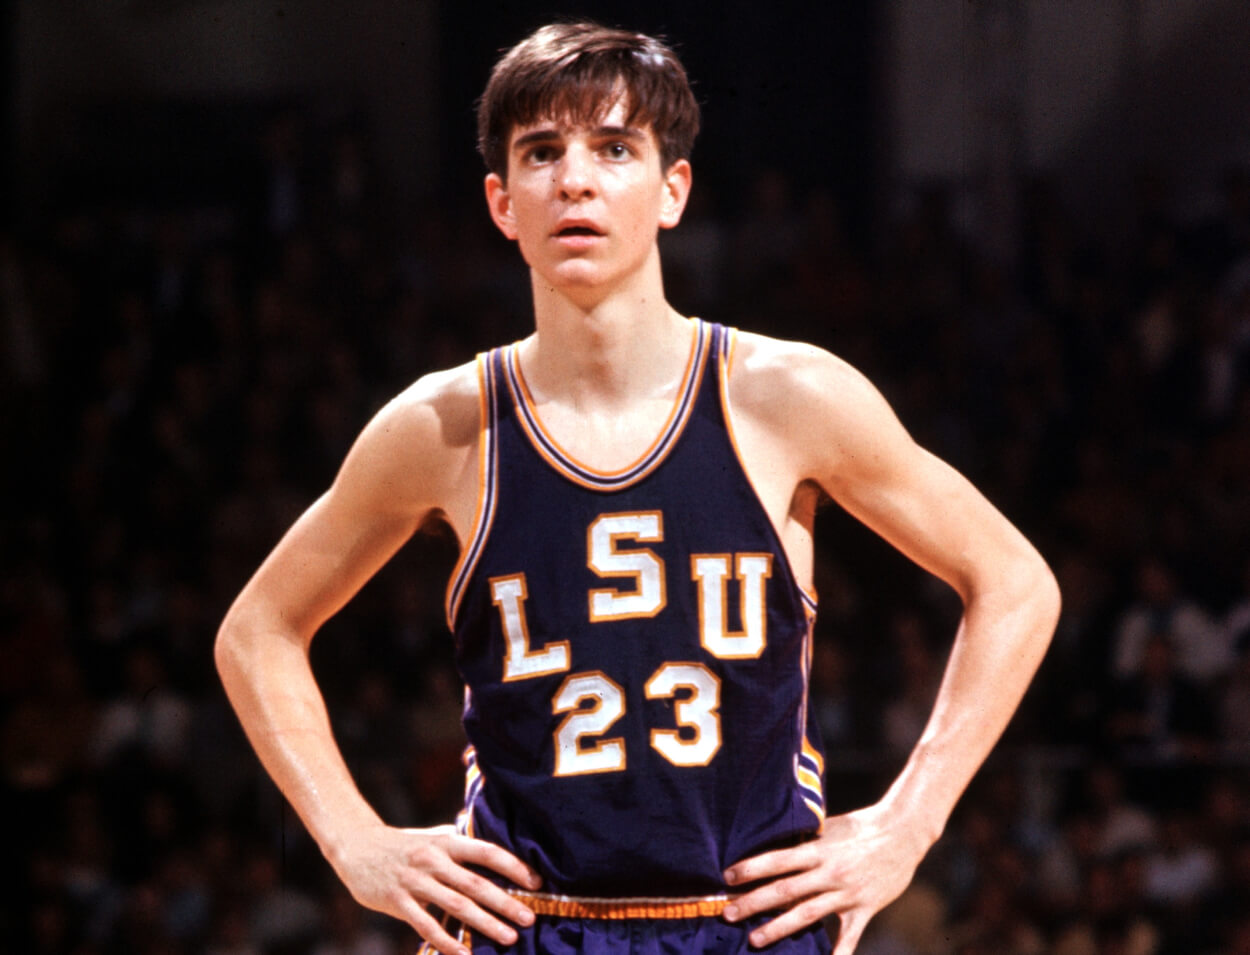 Pete Maravich of the LSU Tigers stands on the court.